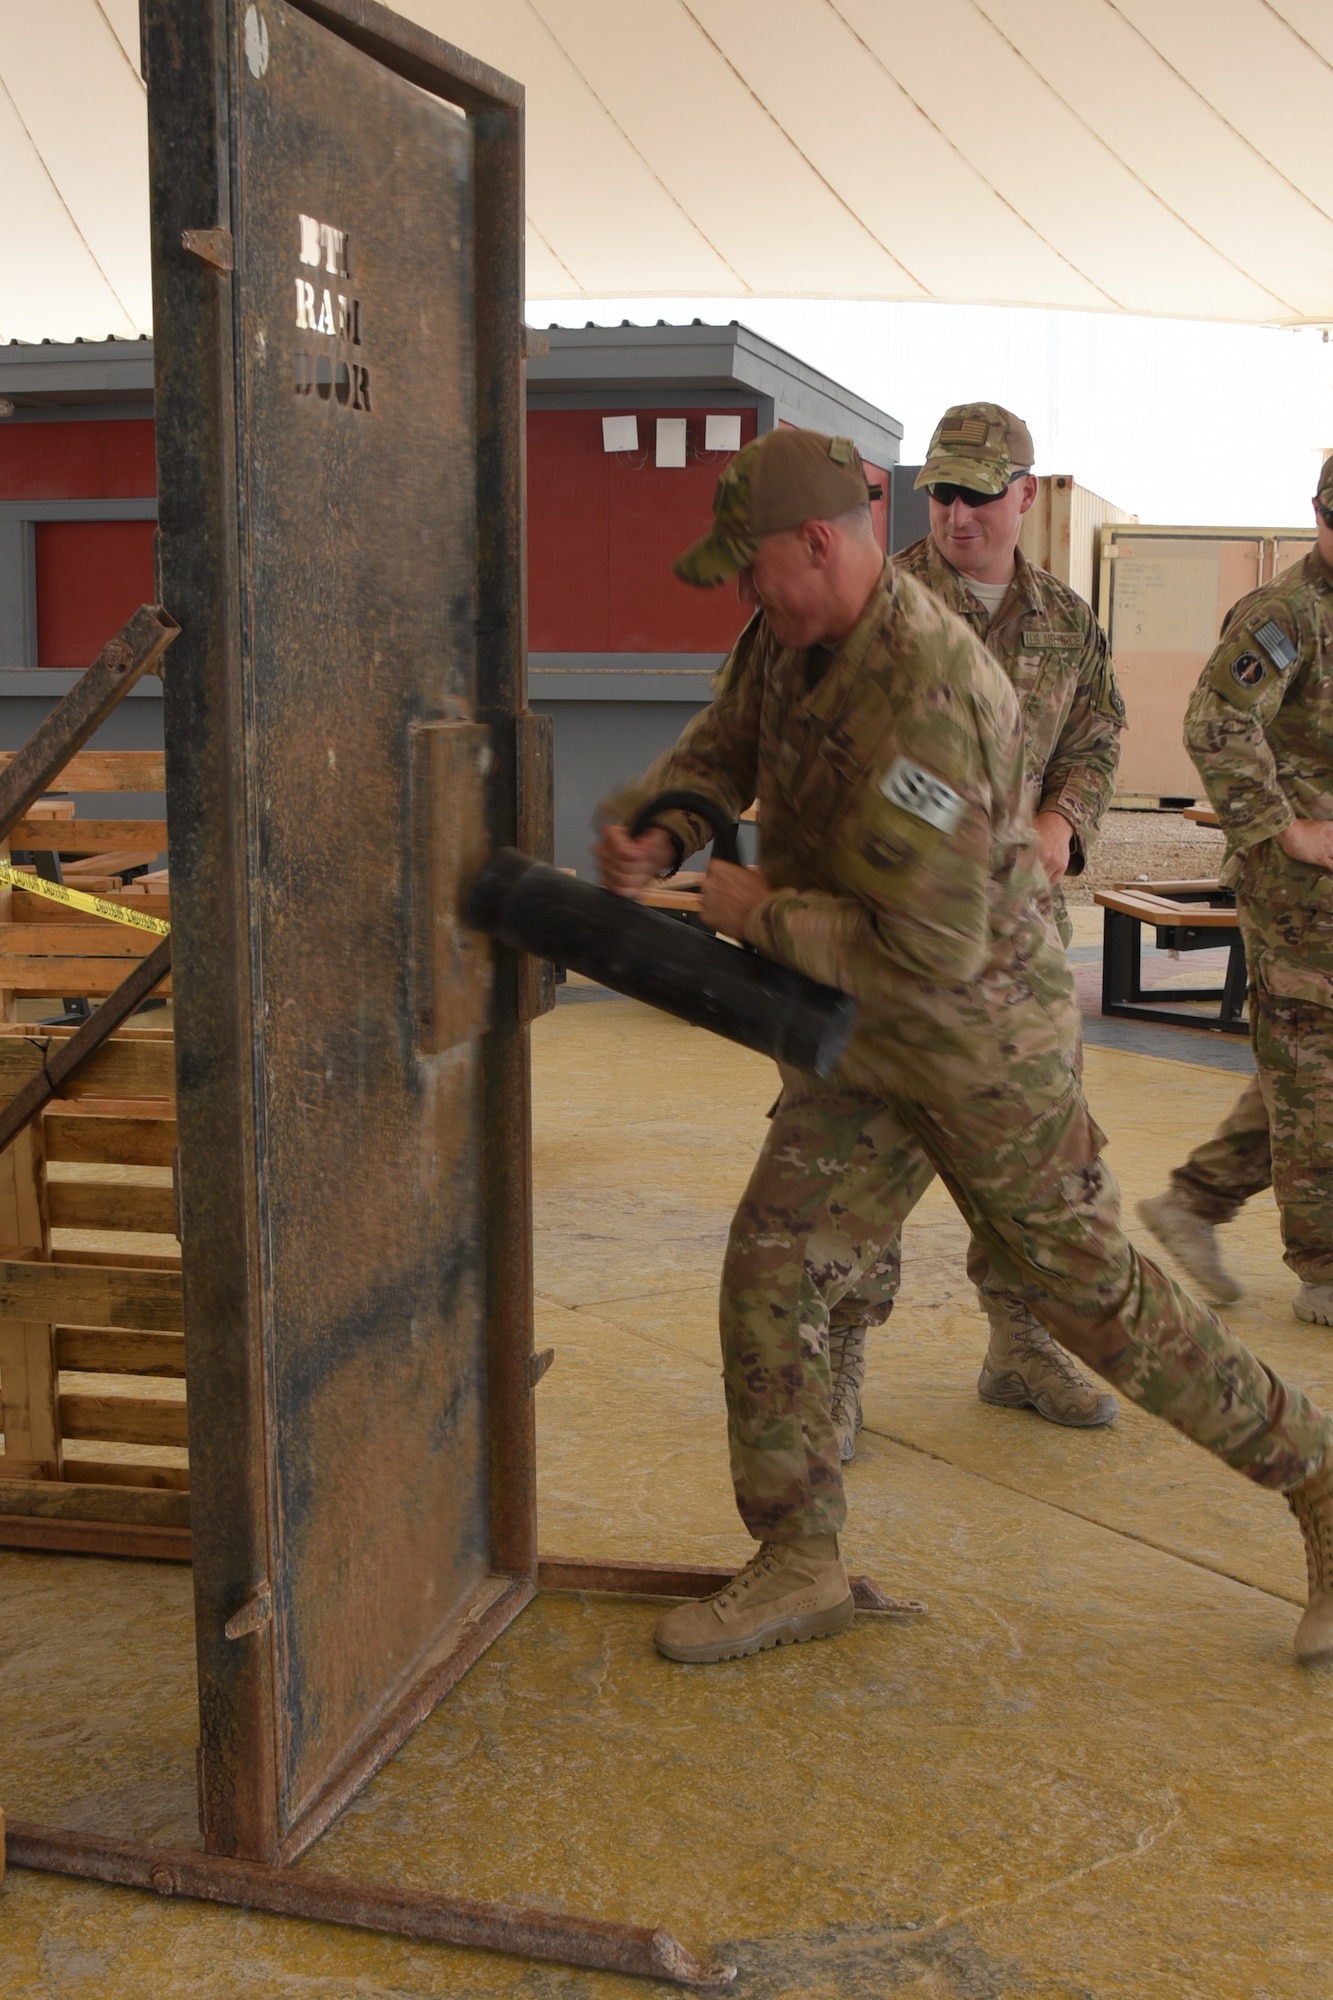 Members of the 379th Expeditionary Security Forces Squadron demonstrate room clearing procedures during National Police Week at Al Udeid Air Base, Qatar, May 16, 2018. Throughout the week, security forces members held numerous events to highlight capabilities and competencies of the squadron. (U.S. Air Force photo by Staff Sgt. Enjoli Saunders)